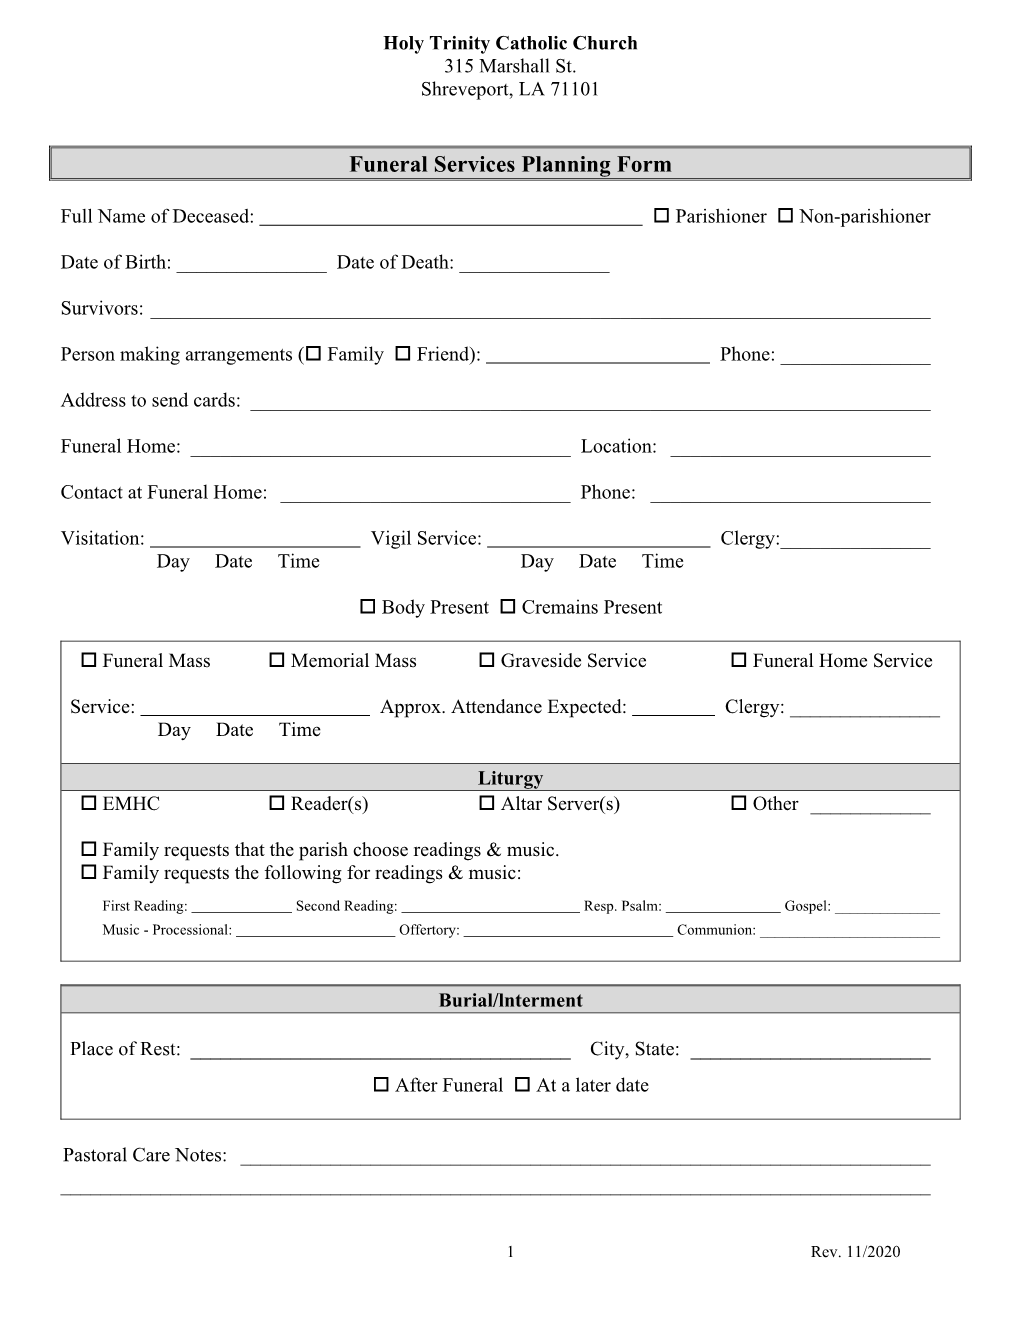 Funeral Services Planning Form